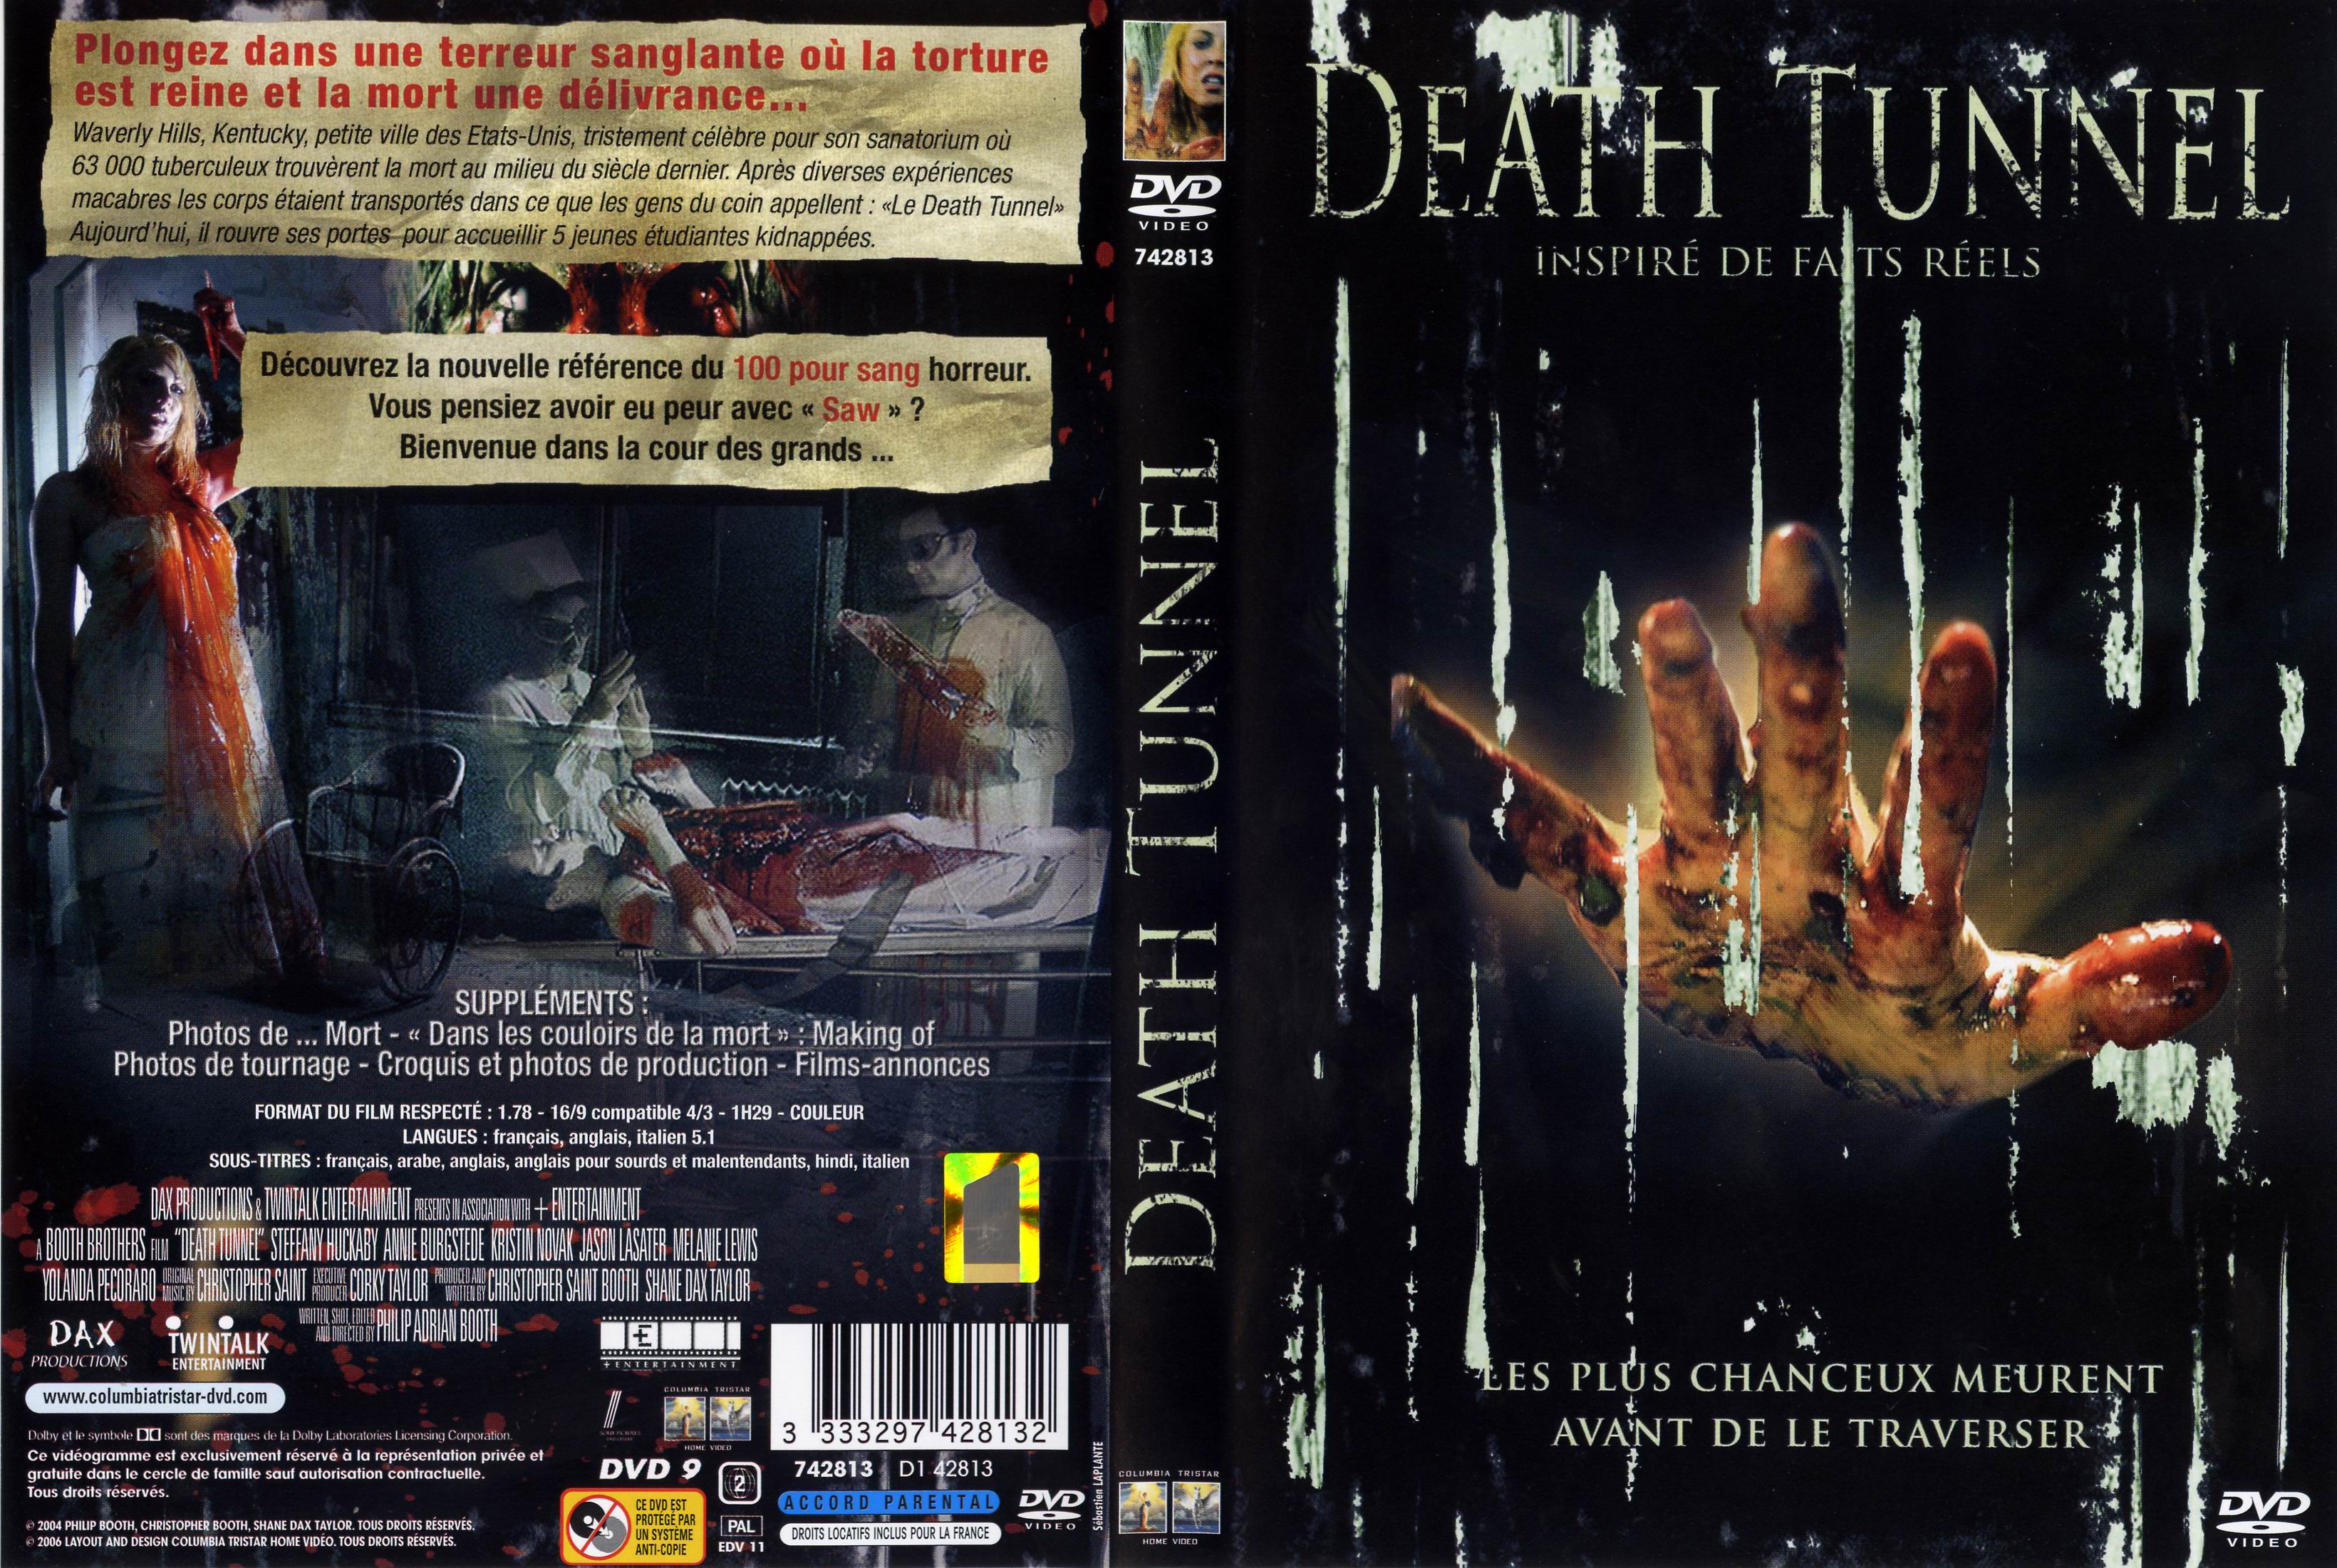 Jaquette DVD Death tunnel